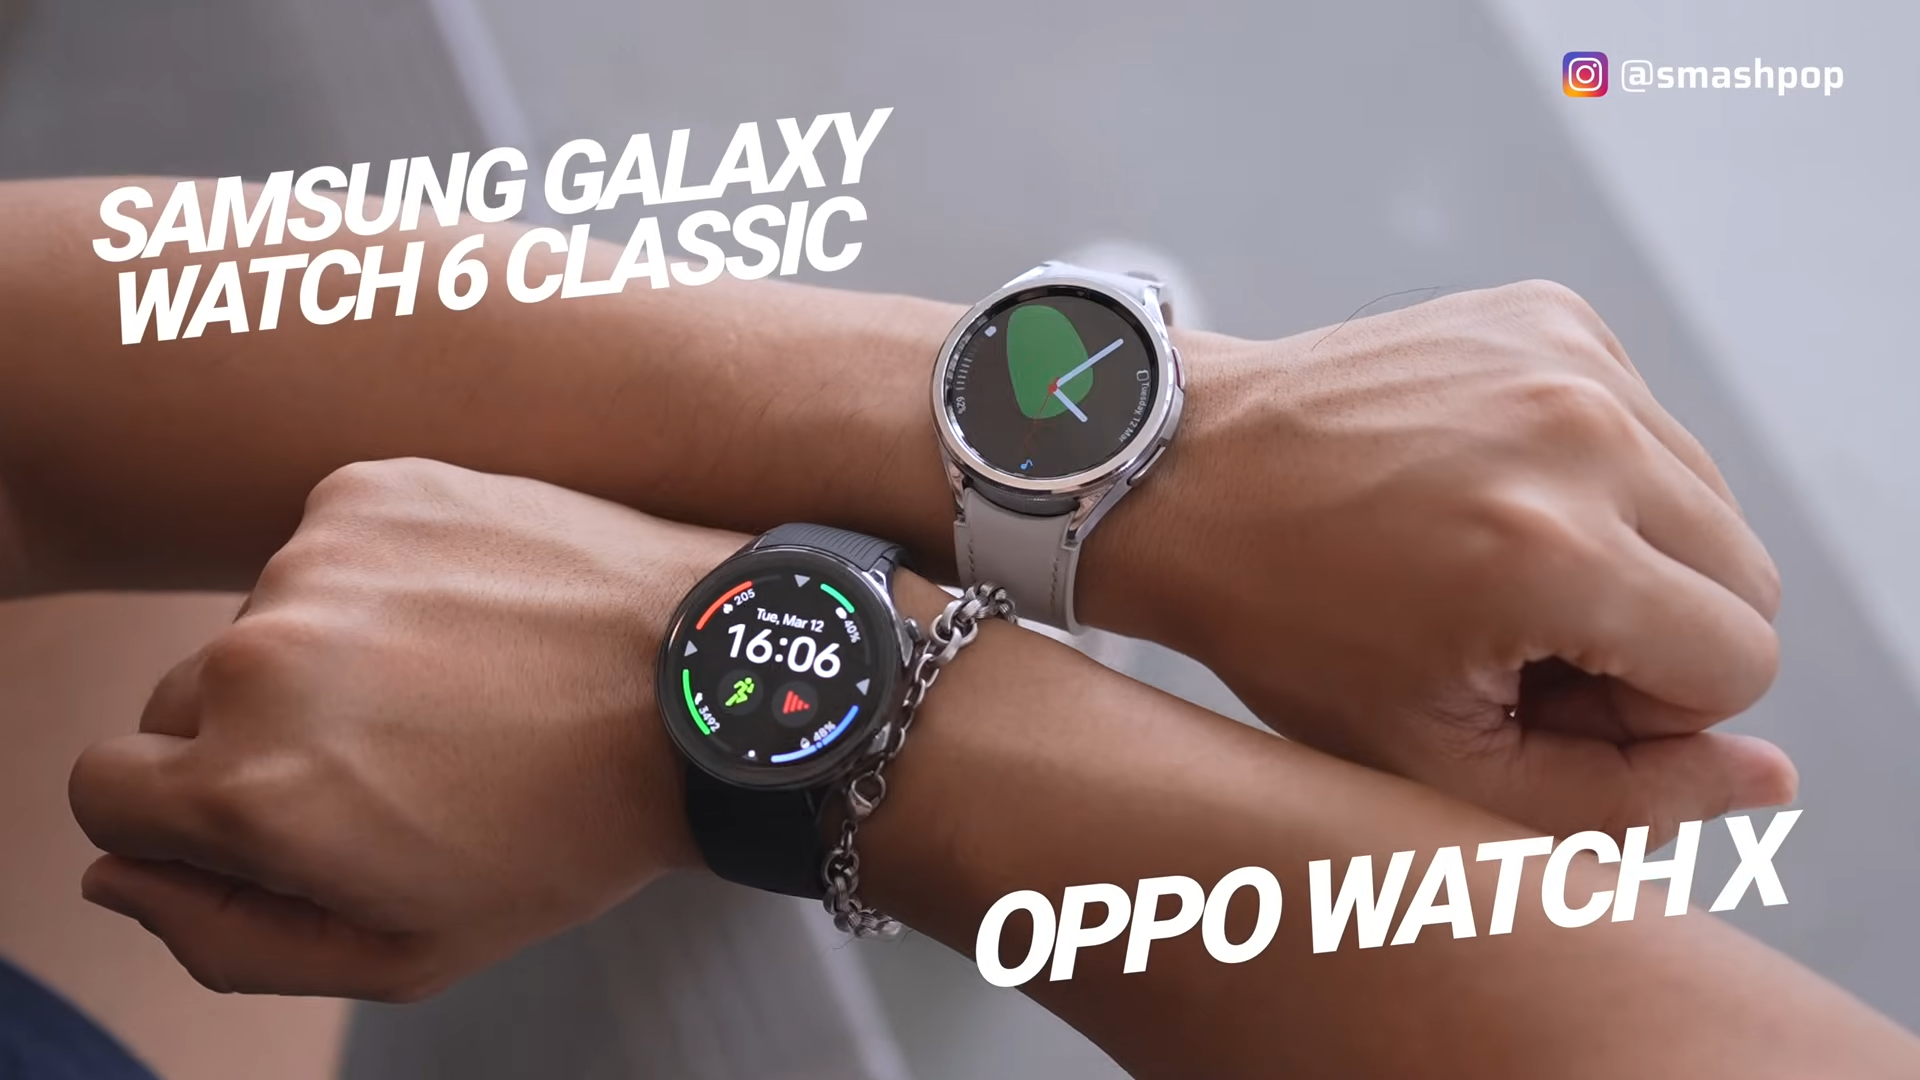 gk9KwIPeMSY 00-00-16 OPPO Watch X vs Samsung Galaxy Watch 6 Classic_ KING of Android Watches_ _ smashpop.png